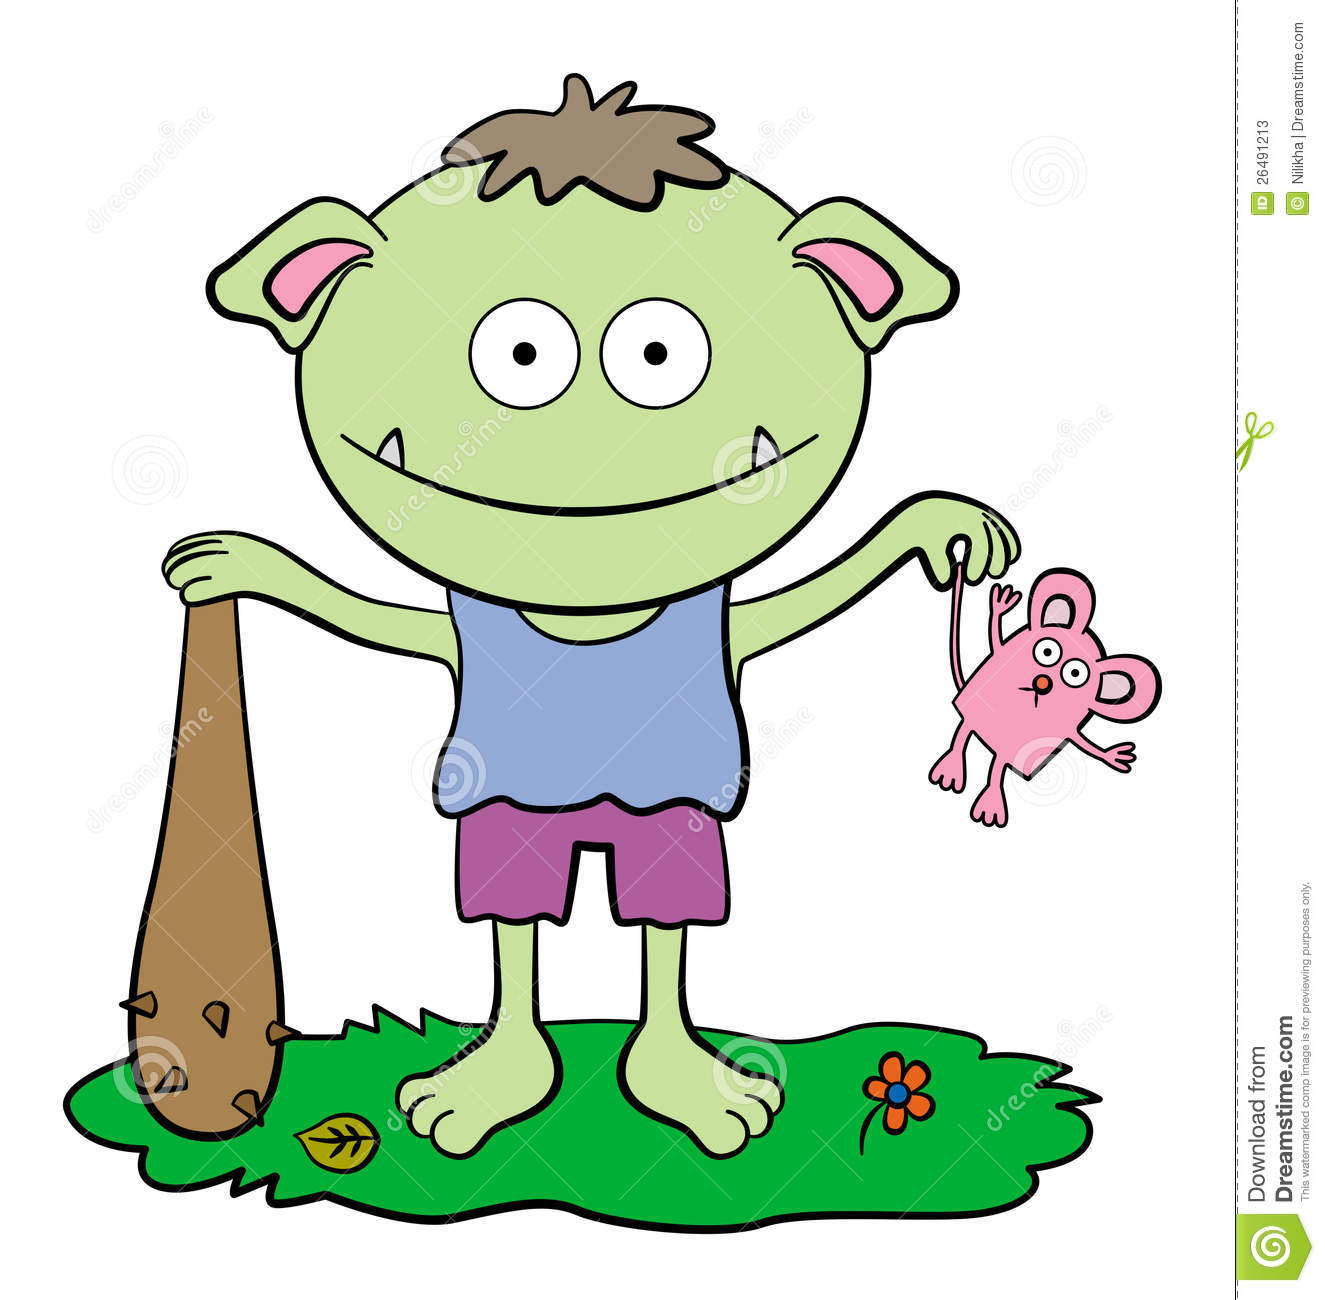 Illustration Of A Cute And Smiling Ogre Holding A Little Mouse